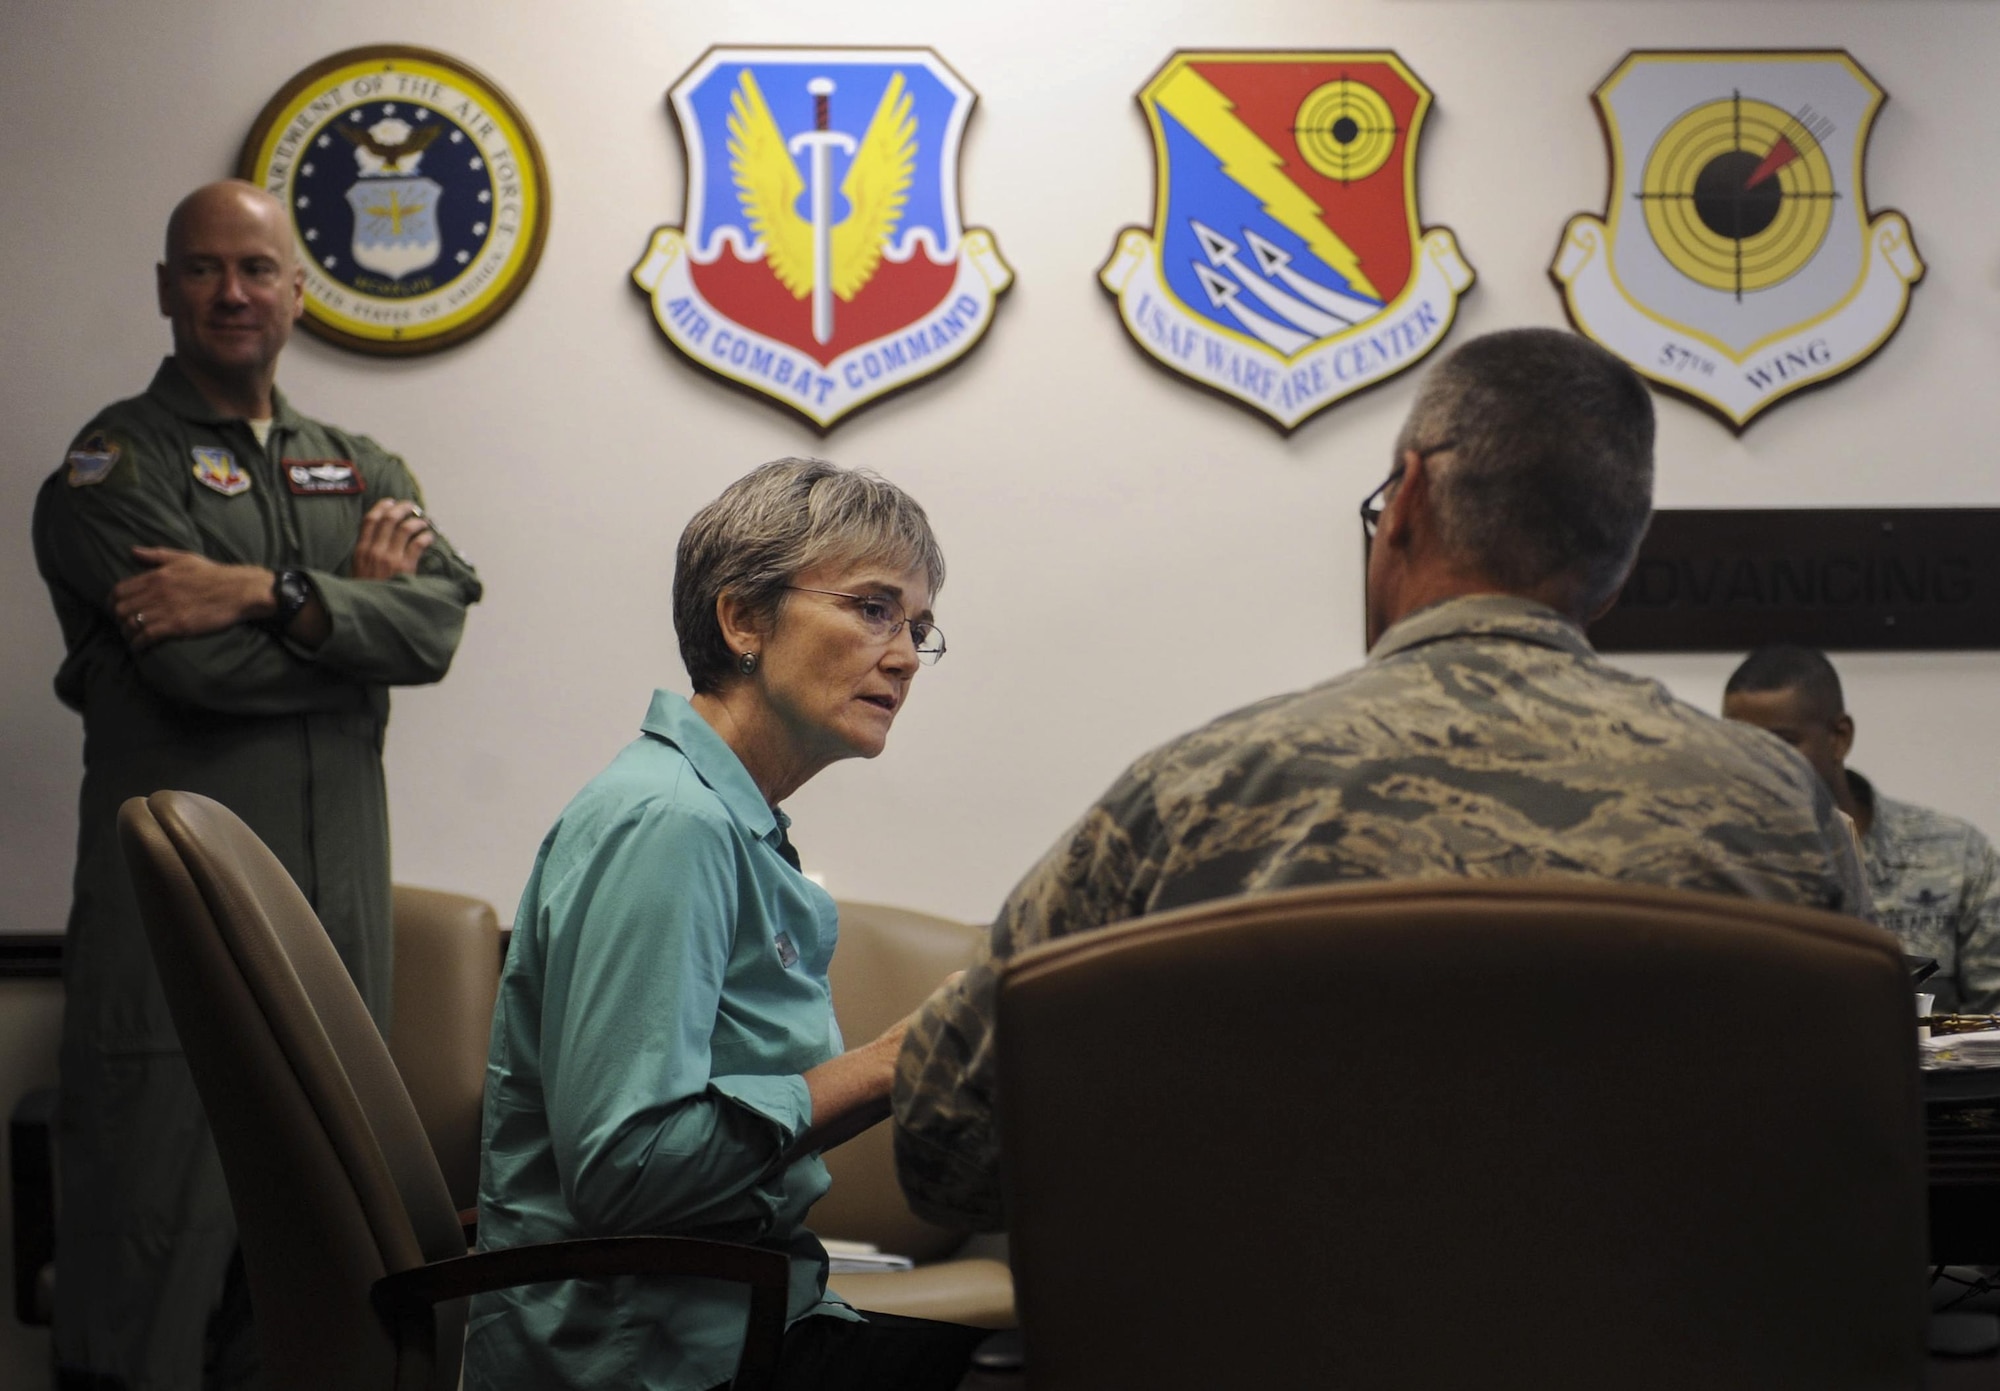 Air Force Secretary Heather Wilson speaks with Maj. Gen. Peter Gersten, United States Air Force Warfare Center commander, during a break at the USAFWC at Nellis Air Force Base, Nevada, July 18, 2017. Wilson saw firsthand how Nellis is at the forefront of modernization. (U.S. Air Force photo by Senior Airman Kevin Tanenbaum)